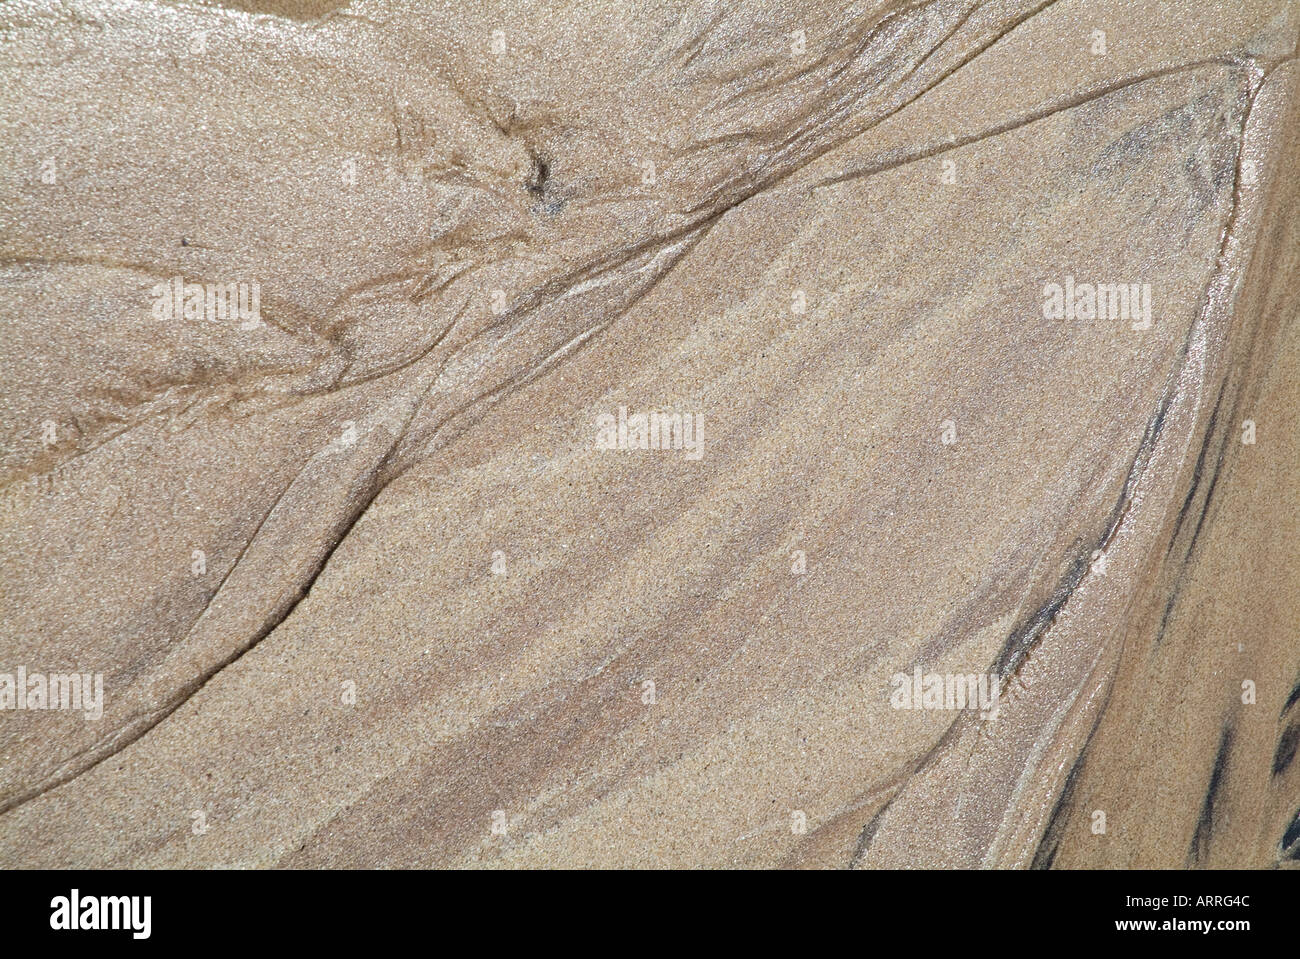 dh Texture backdrop beach SAND BACKGROUNDS BACKGROUND PATTERN Silver White sands copyspace close up from above back drop closeup Stock Photo